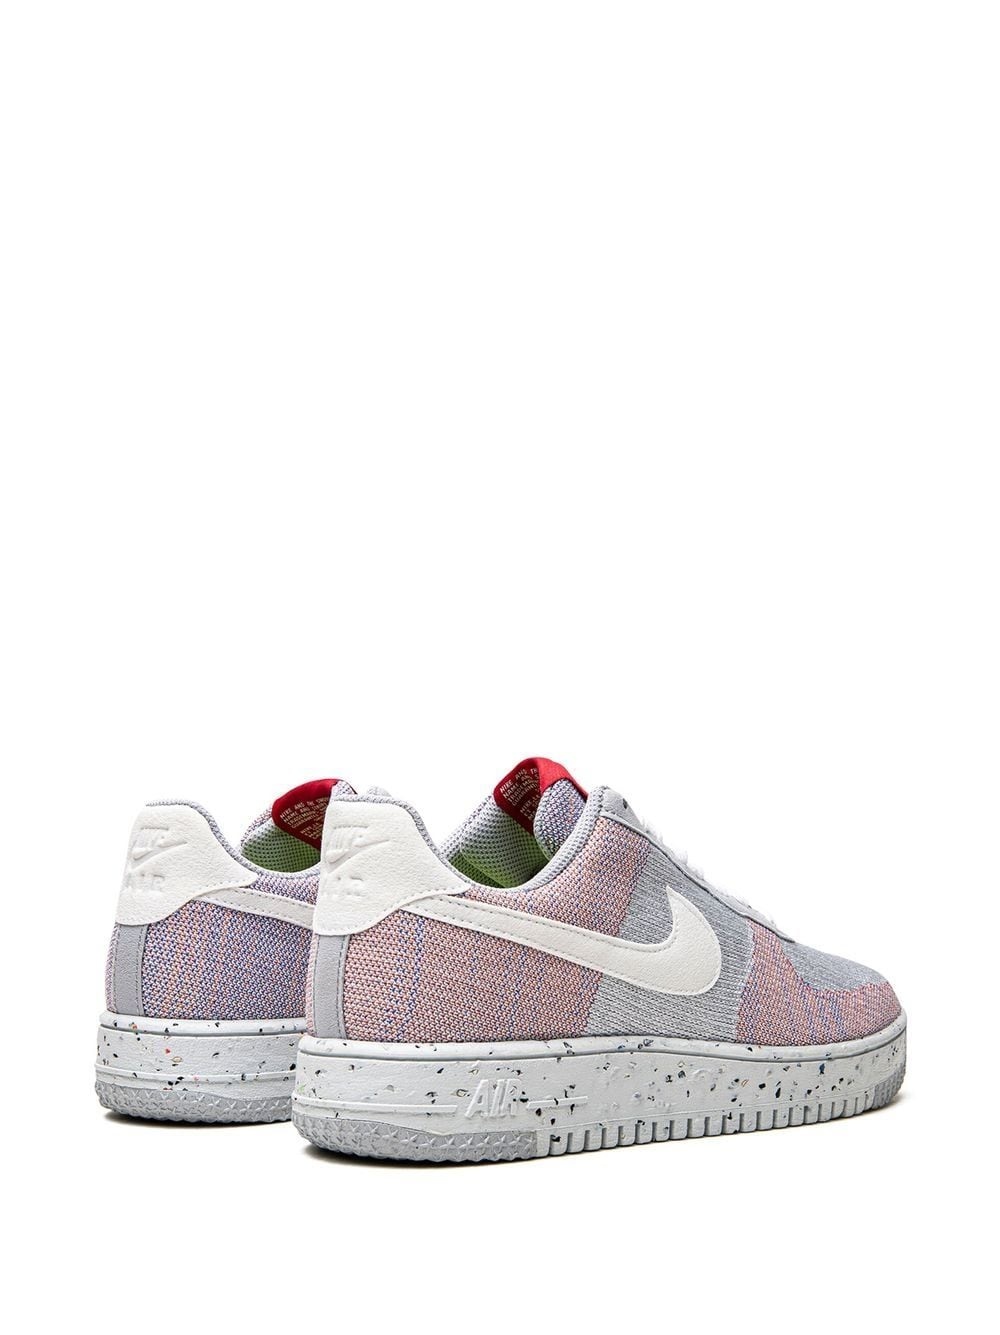 Air Force 1 Low Crater Flyknit "Wolf Grey" sneakers - 3